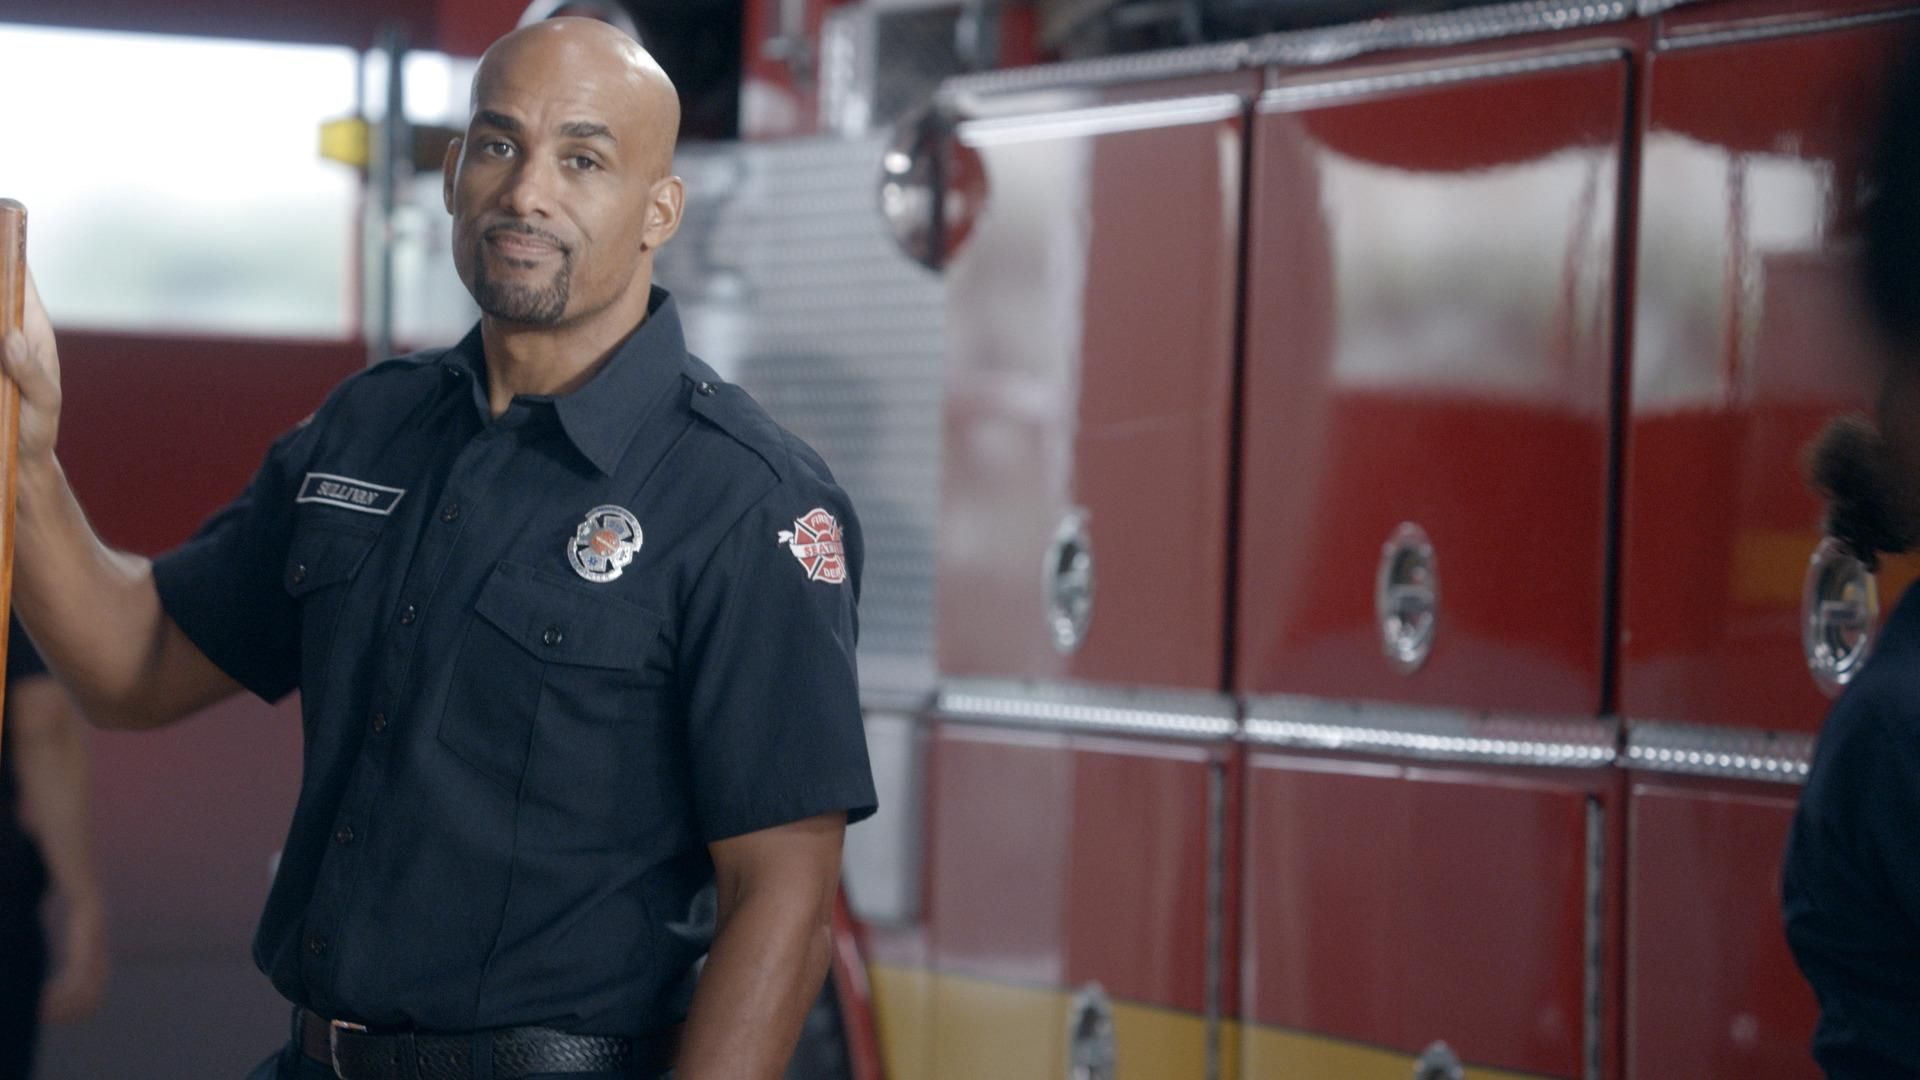 Station 19 S4E4 Don't Look Back in Anger